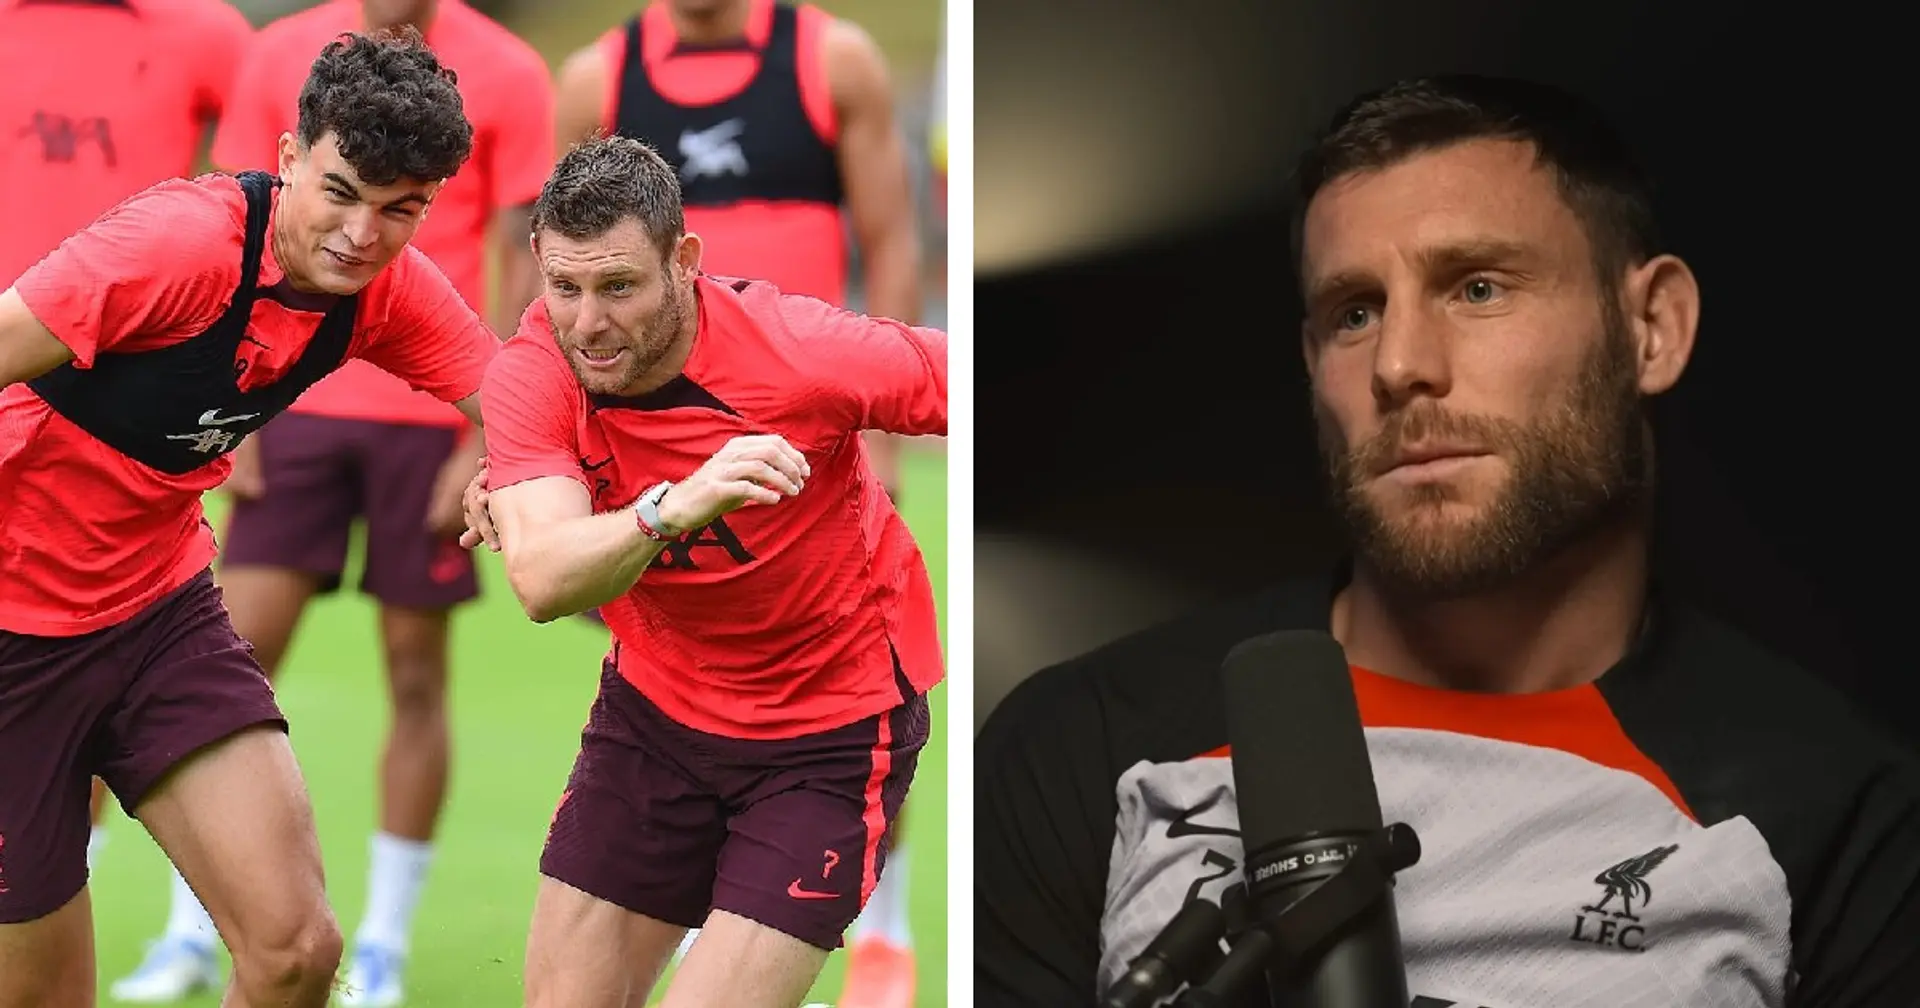 Milner says young players like Bajcetic need to be 'protected' amid negativity due to Liverpool's form